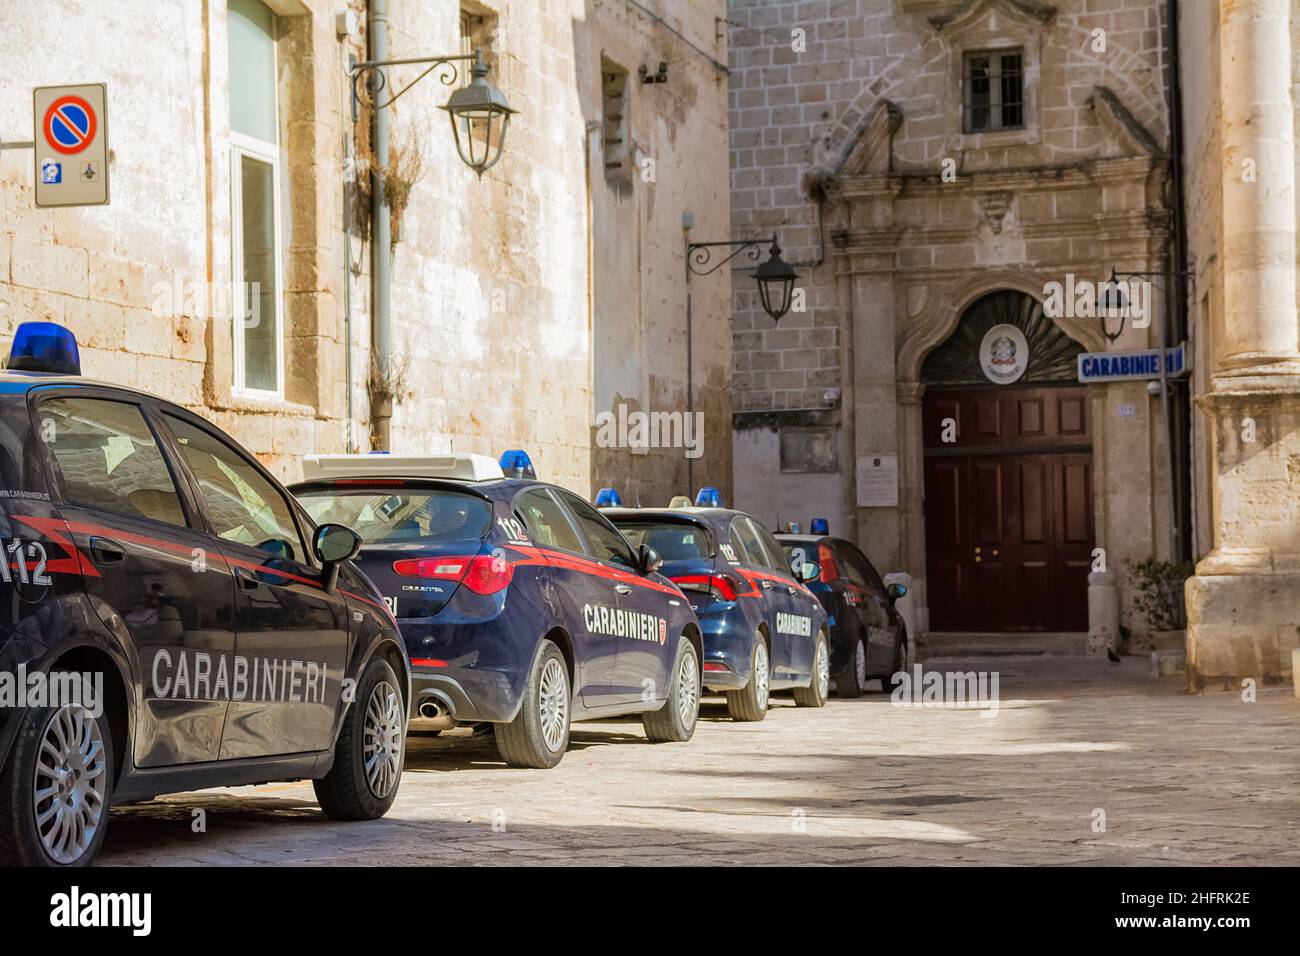 Carabinieri car in the foreground and in the background the police station of Monopoli (Puglia-Italy) Stock Photo